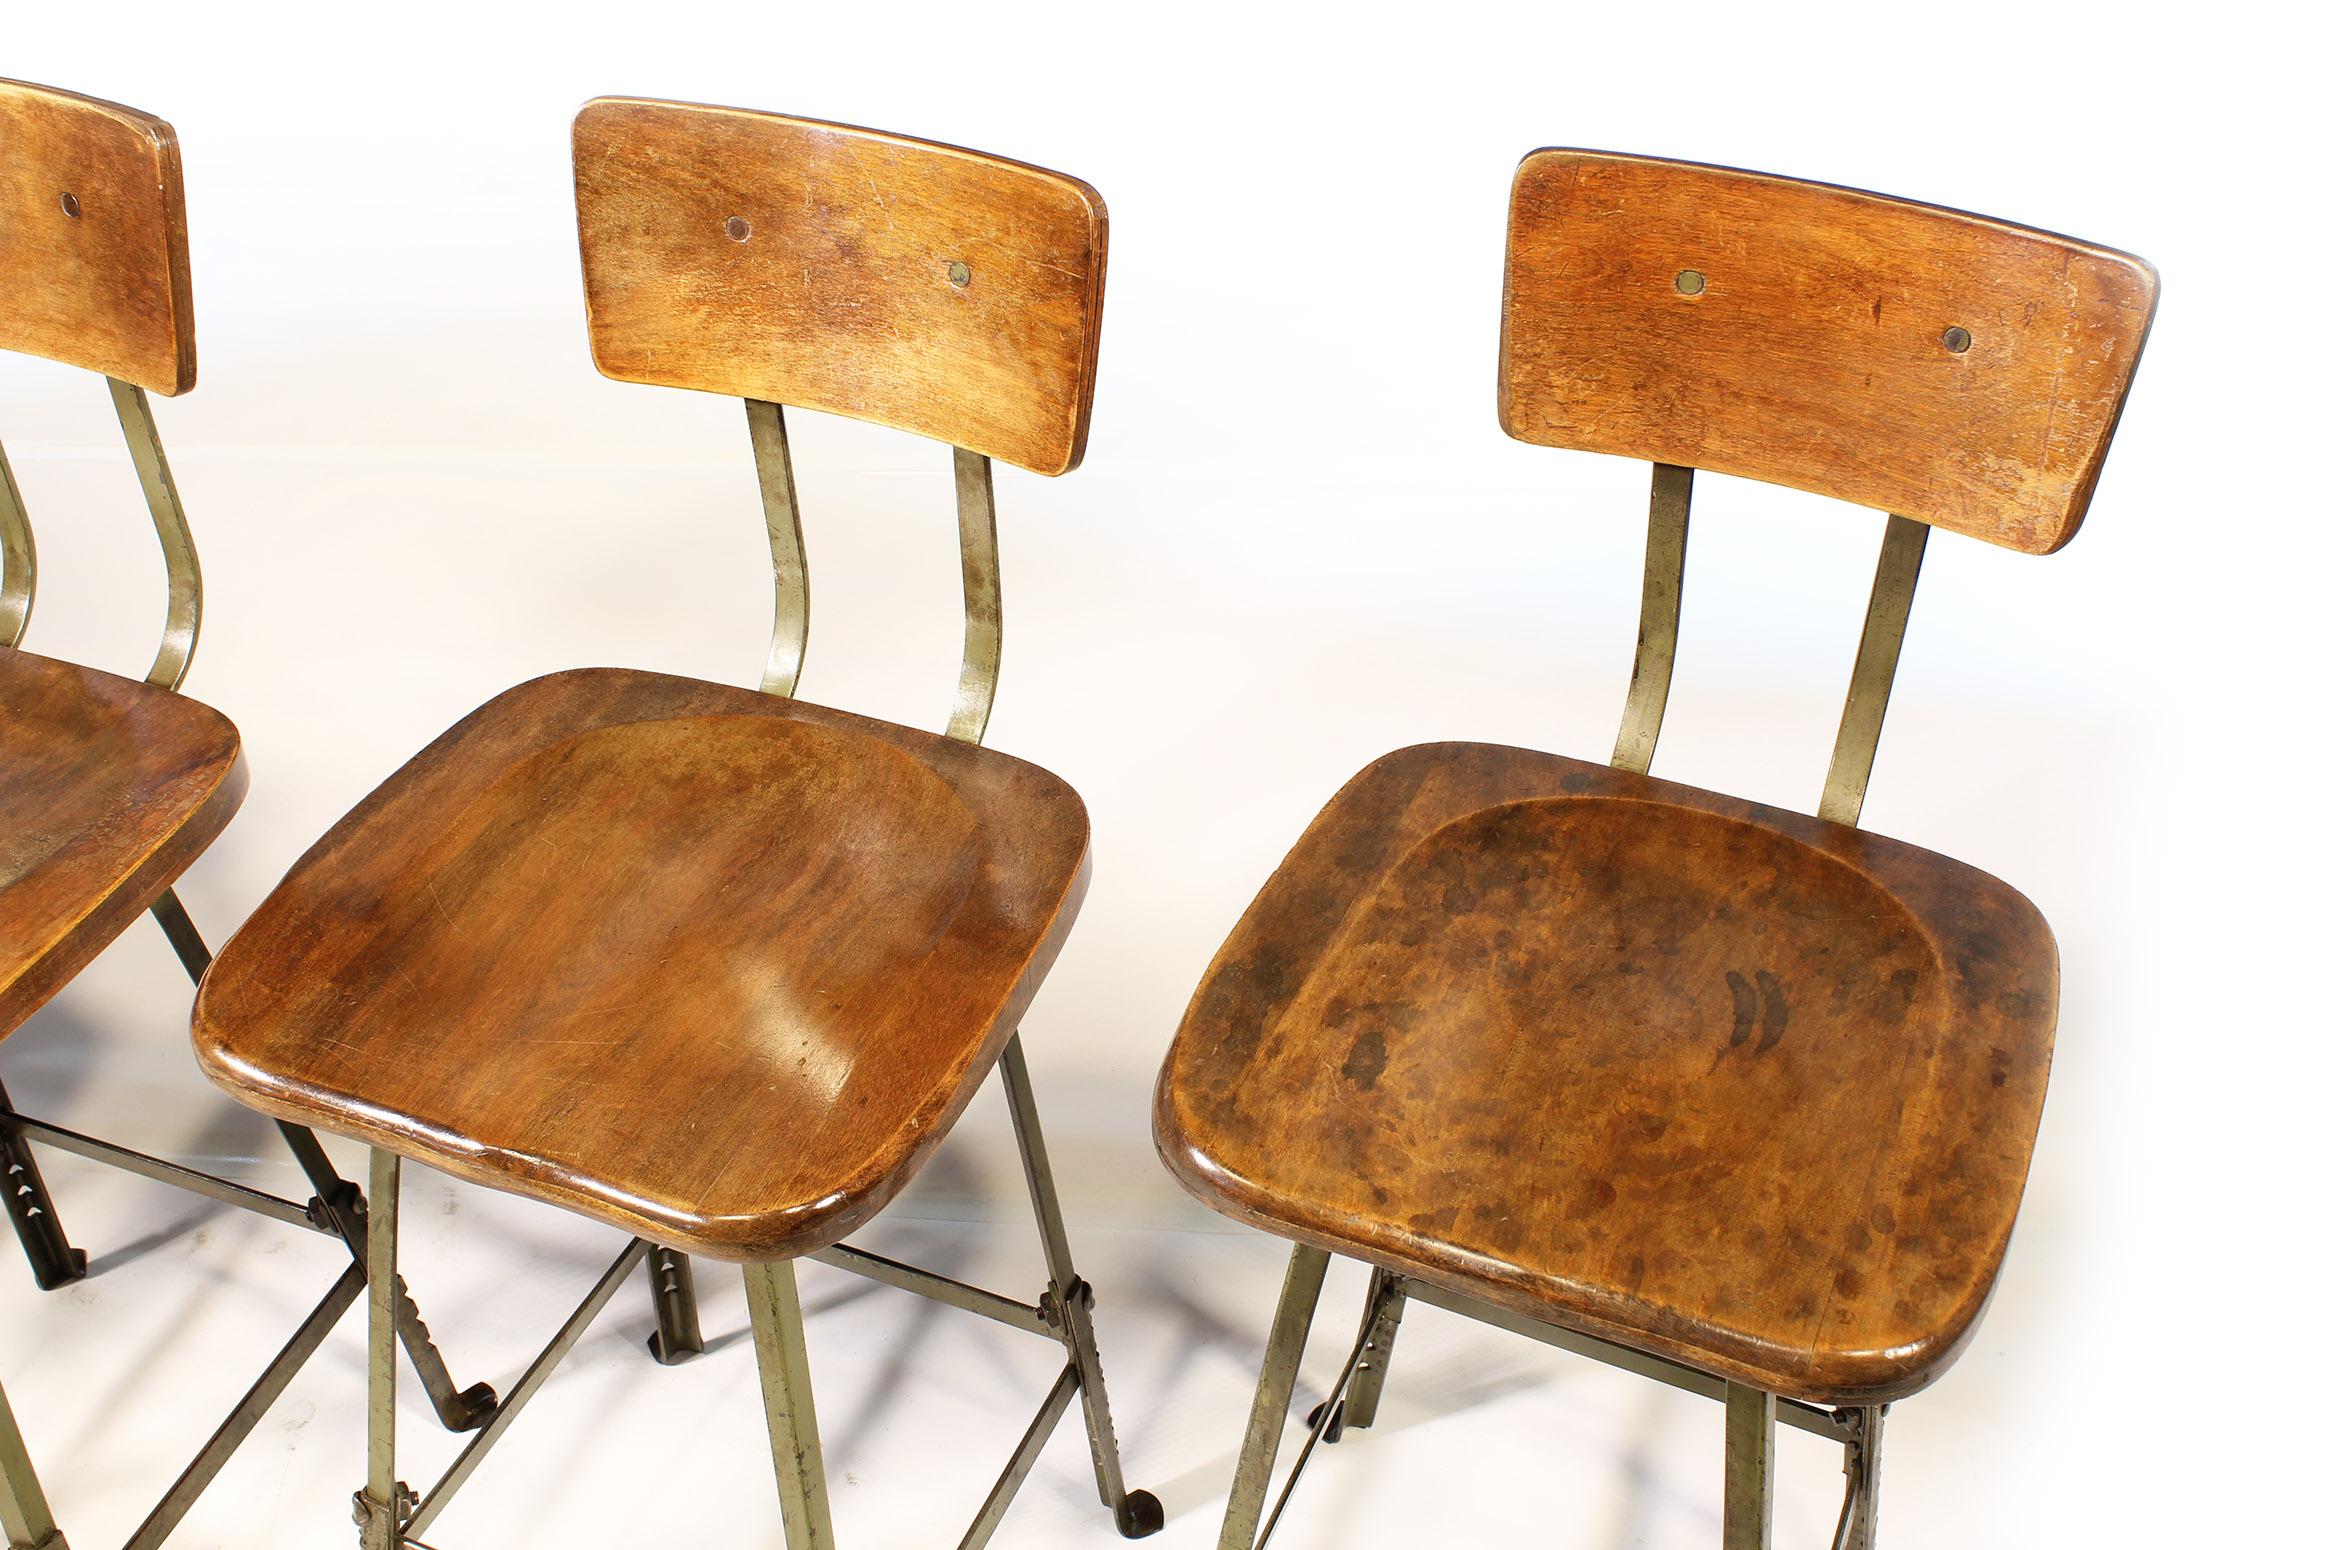 20th Century Set of 4 Authentic Vintage Industrial Shop Stools